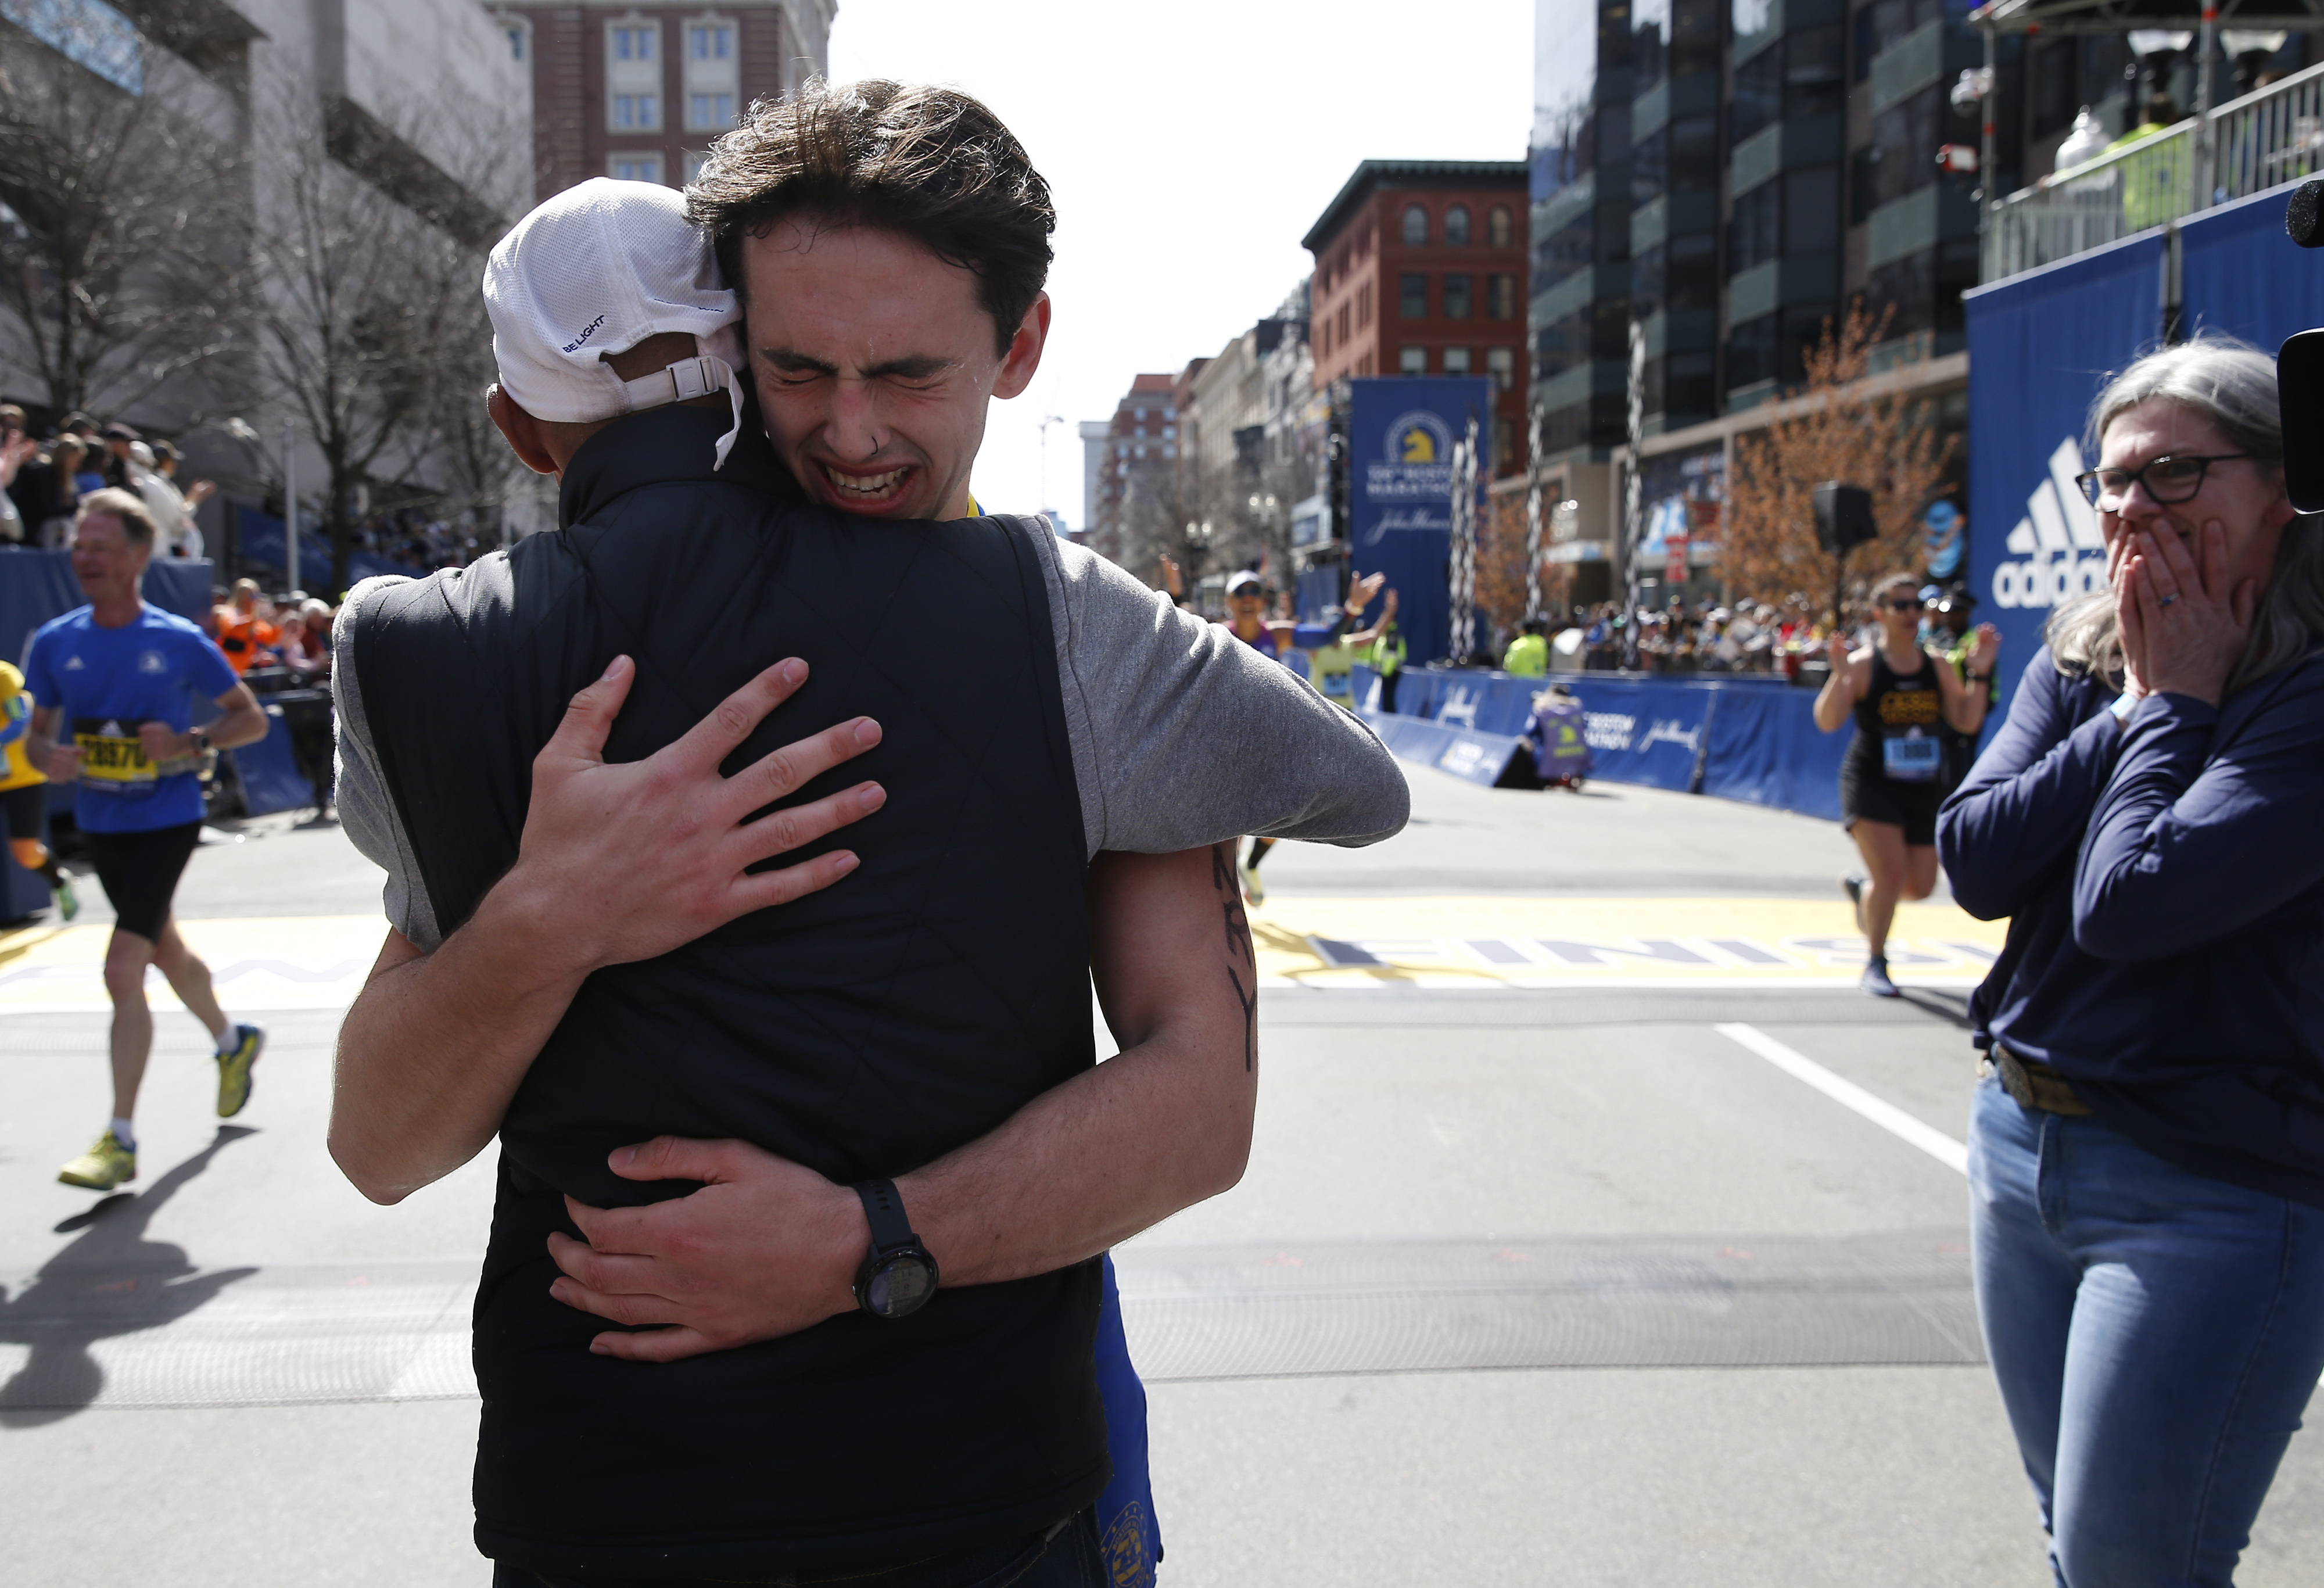 50 years after first running the Boston Marathon, women are